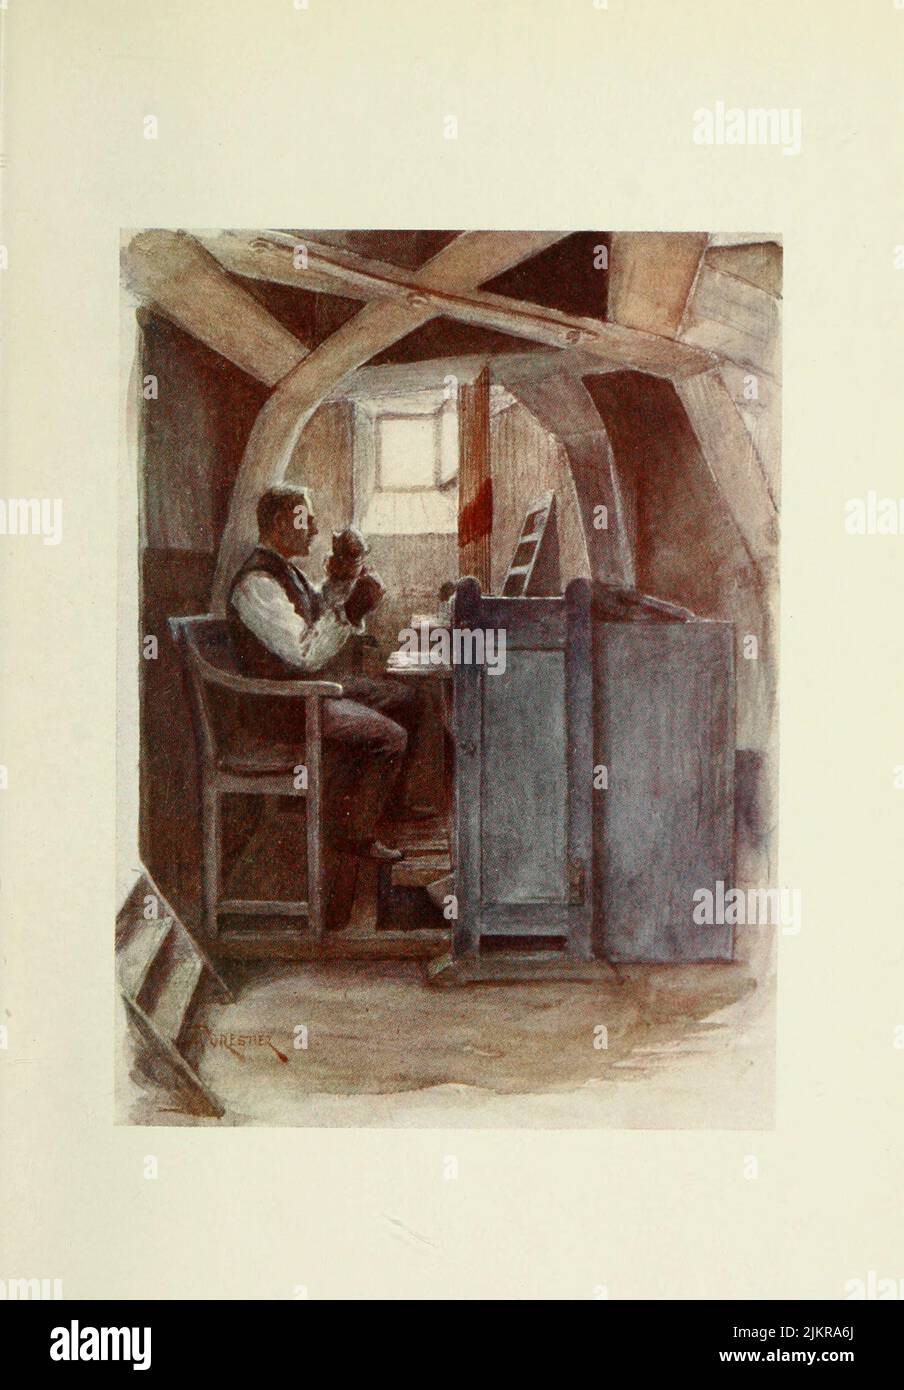 Bell-ringer Playing a Chime Painted by Amedee Forestier, from the book '  Bruges and West Flanders ' by George William Thomson Omond, Publication date 1906 Publisher London : A. & C. Black Sir Amédée Forestier (Paris 1854 – 18 November 1930 London) was an Anglo-French artist and illustrator who specialised in historical and prehistoric scenes, and landscapes. Stock Photo